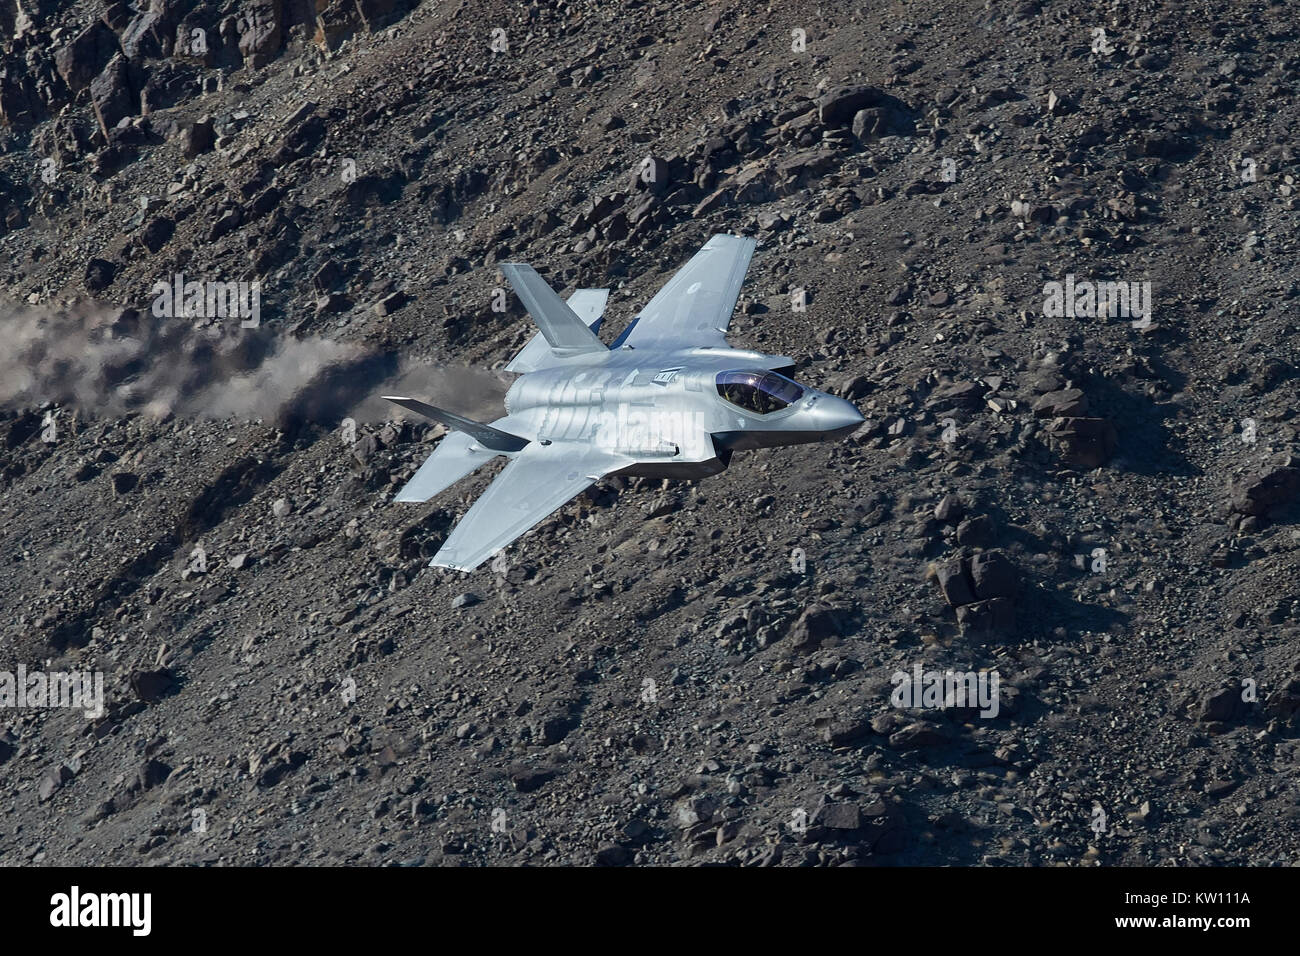 Lockheed Martin F-35A Lightning II Joint Strike Fighter (Stealth Jet Fighter), Flying At Low Level Through A Desert Valley In California, USA. Stock Photo